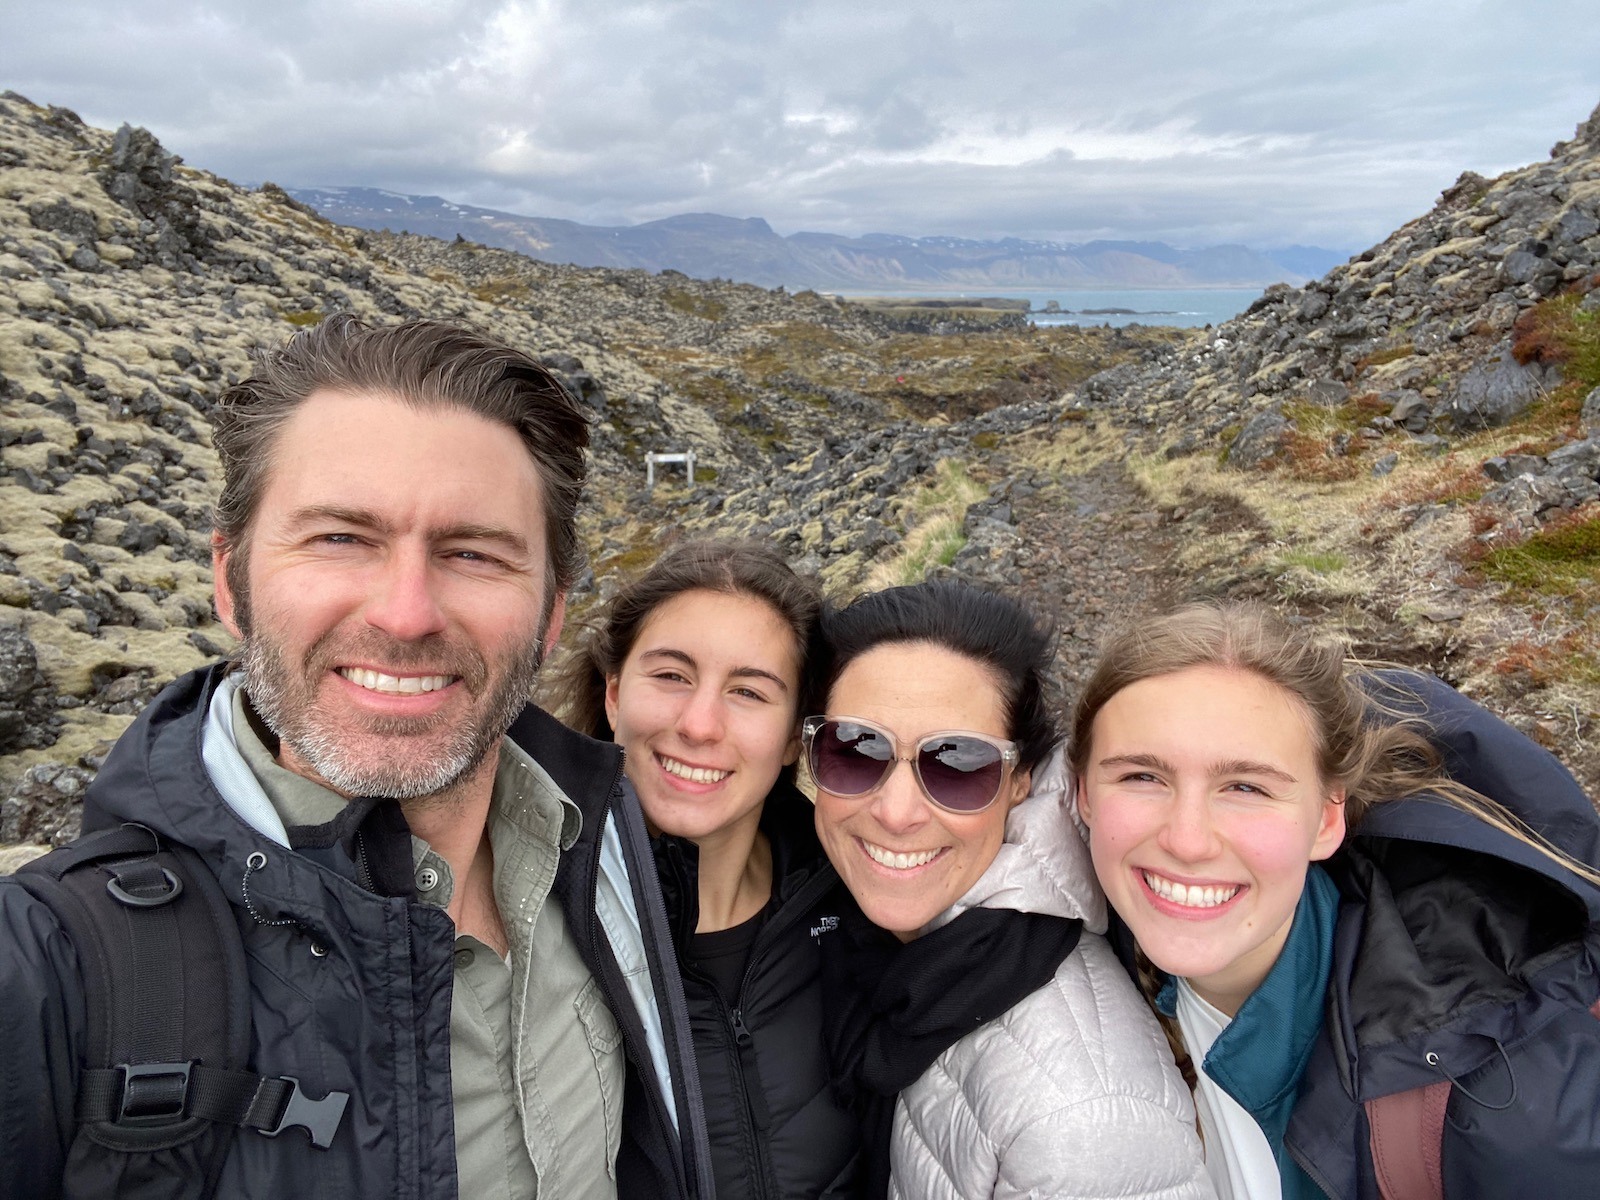 Family portrait with scenic views in the background in Iceland. 